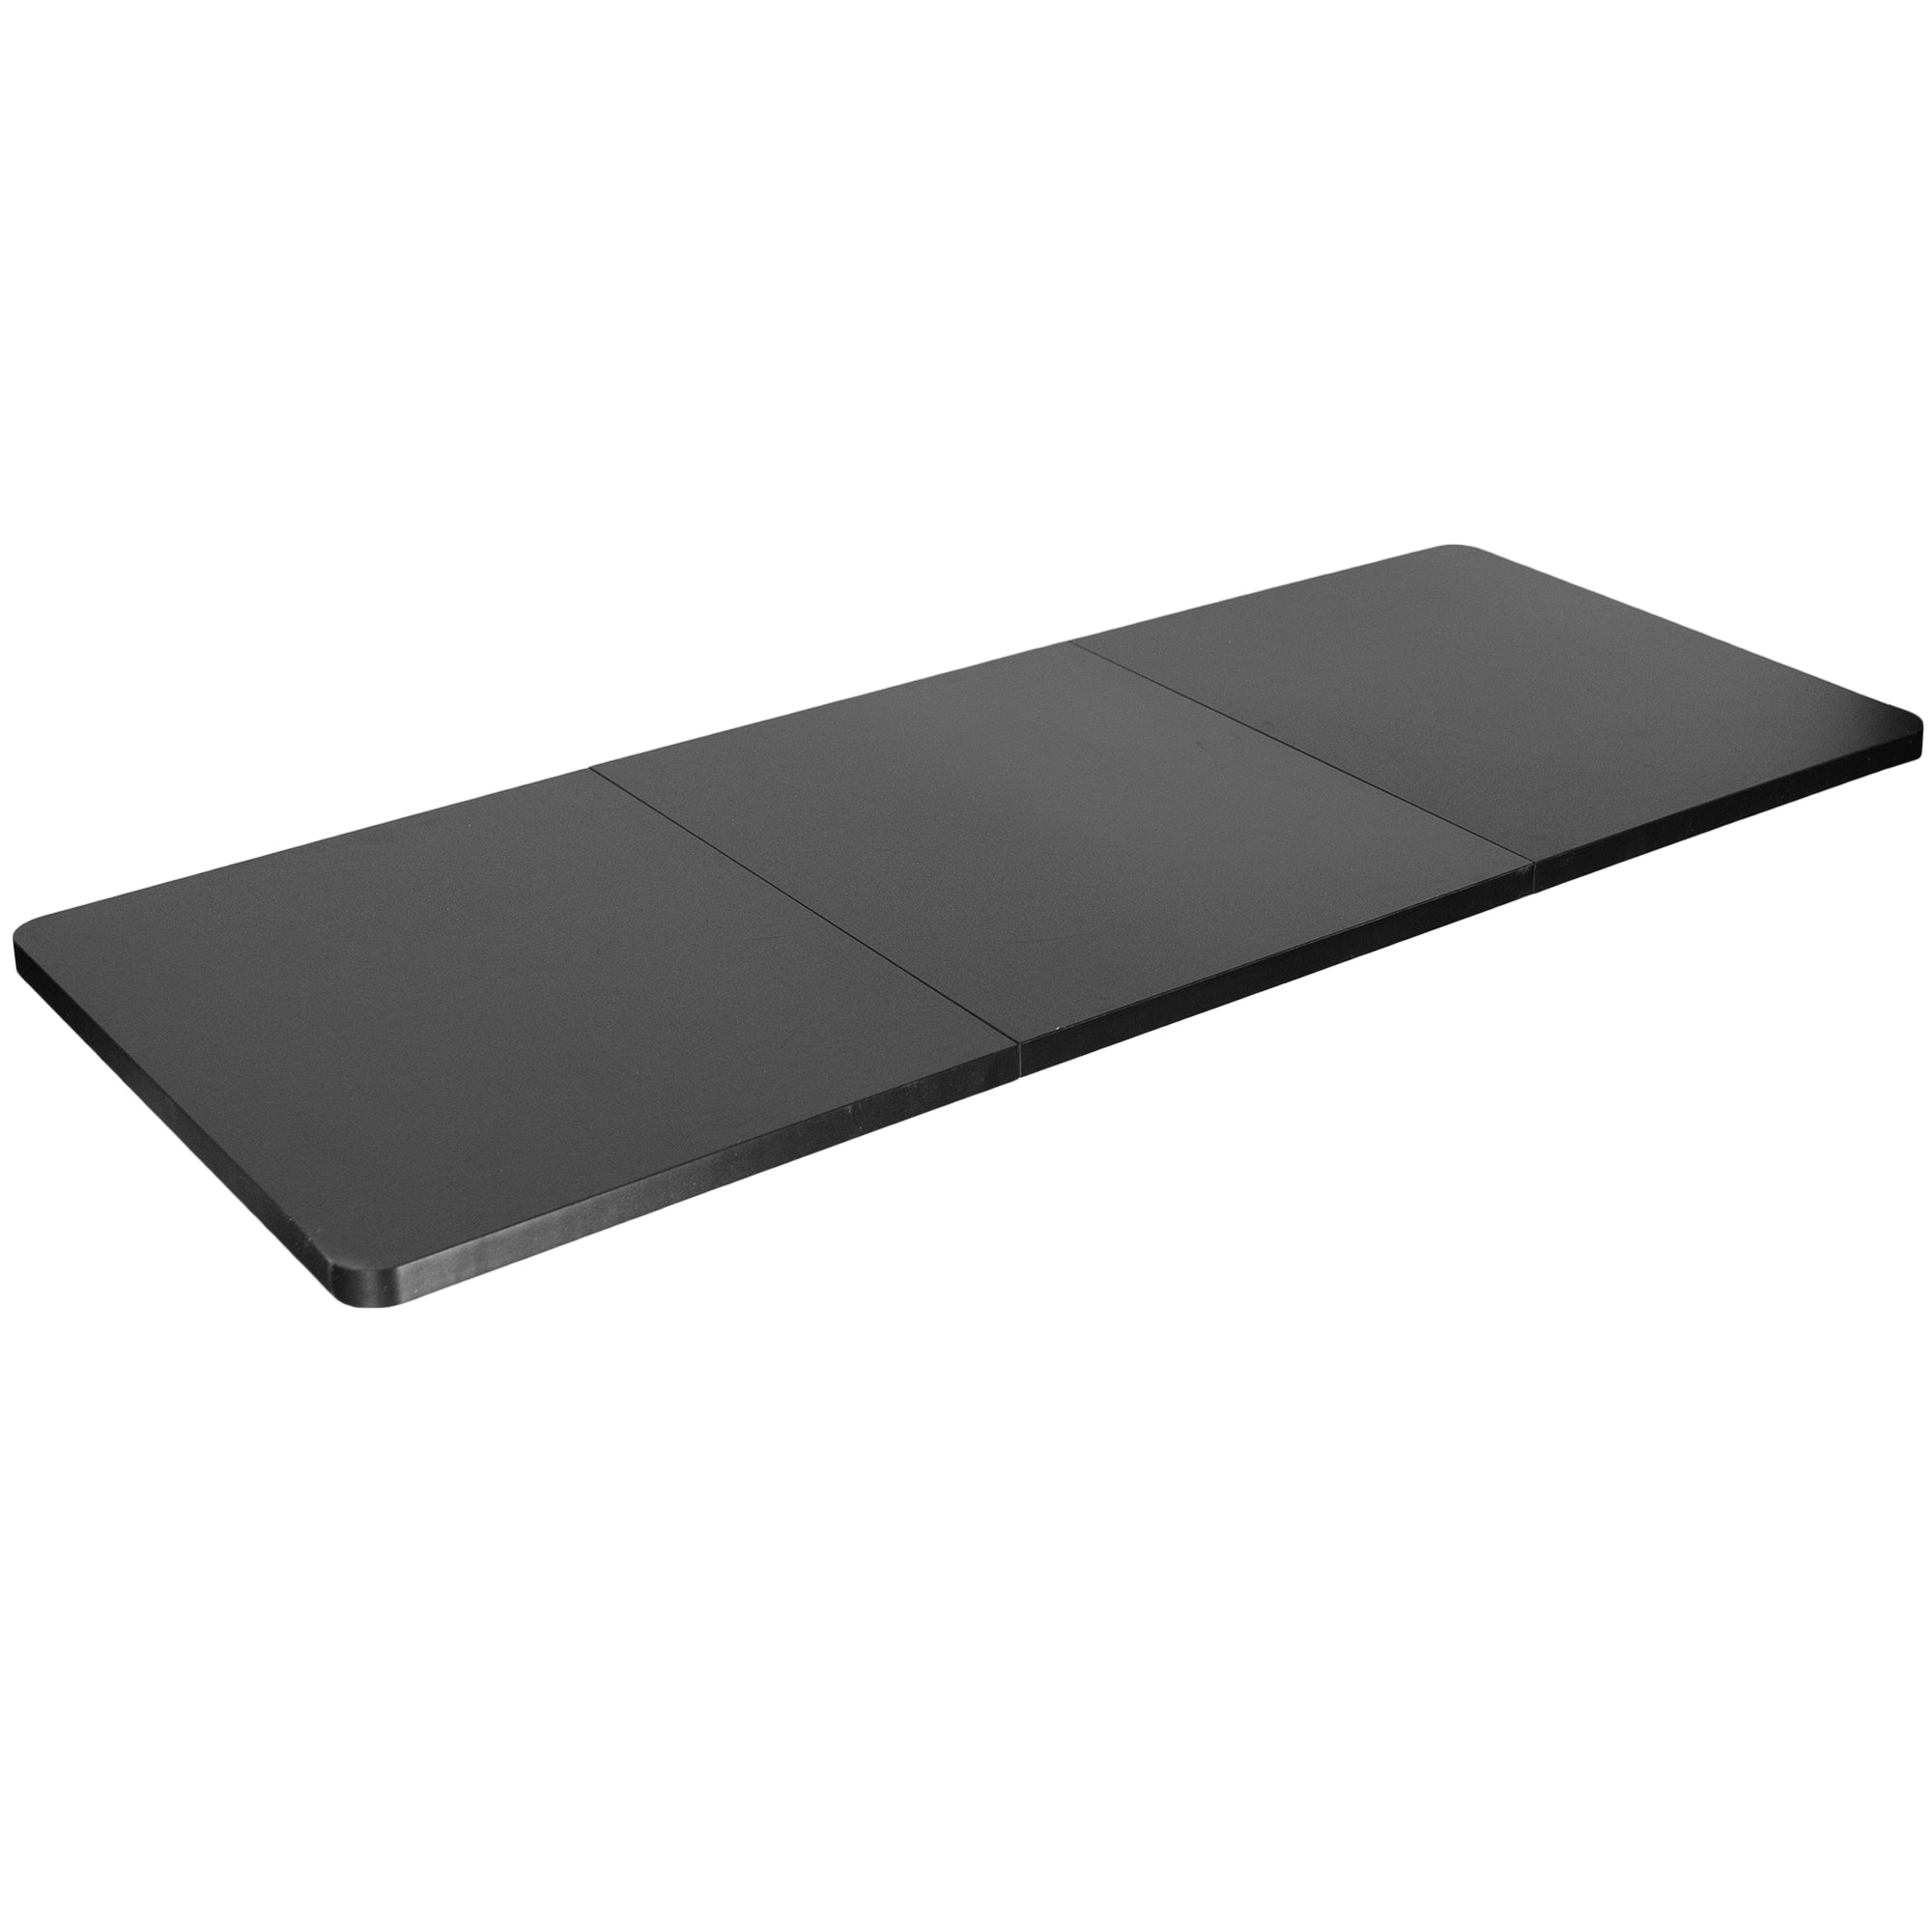 Vivo Black 71 x 30 inch Universal Table Top for Sit to Stand Desk Frames